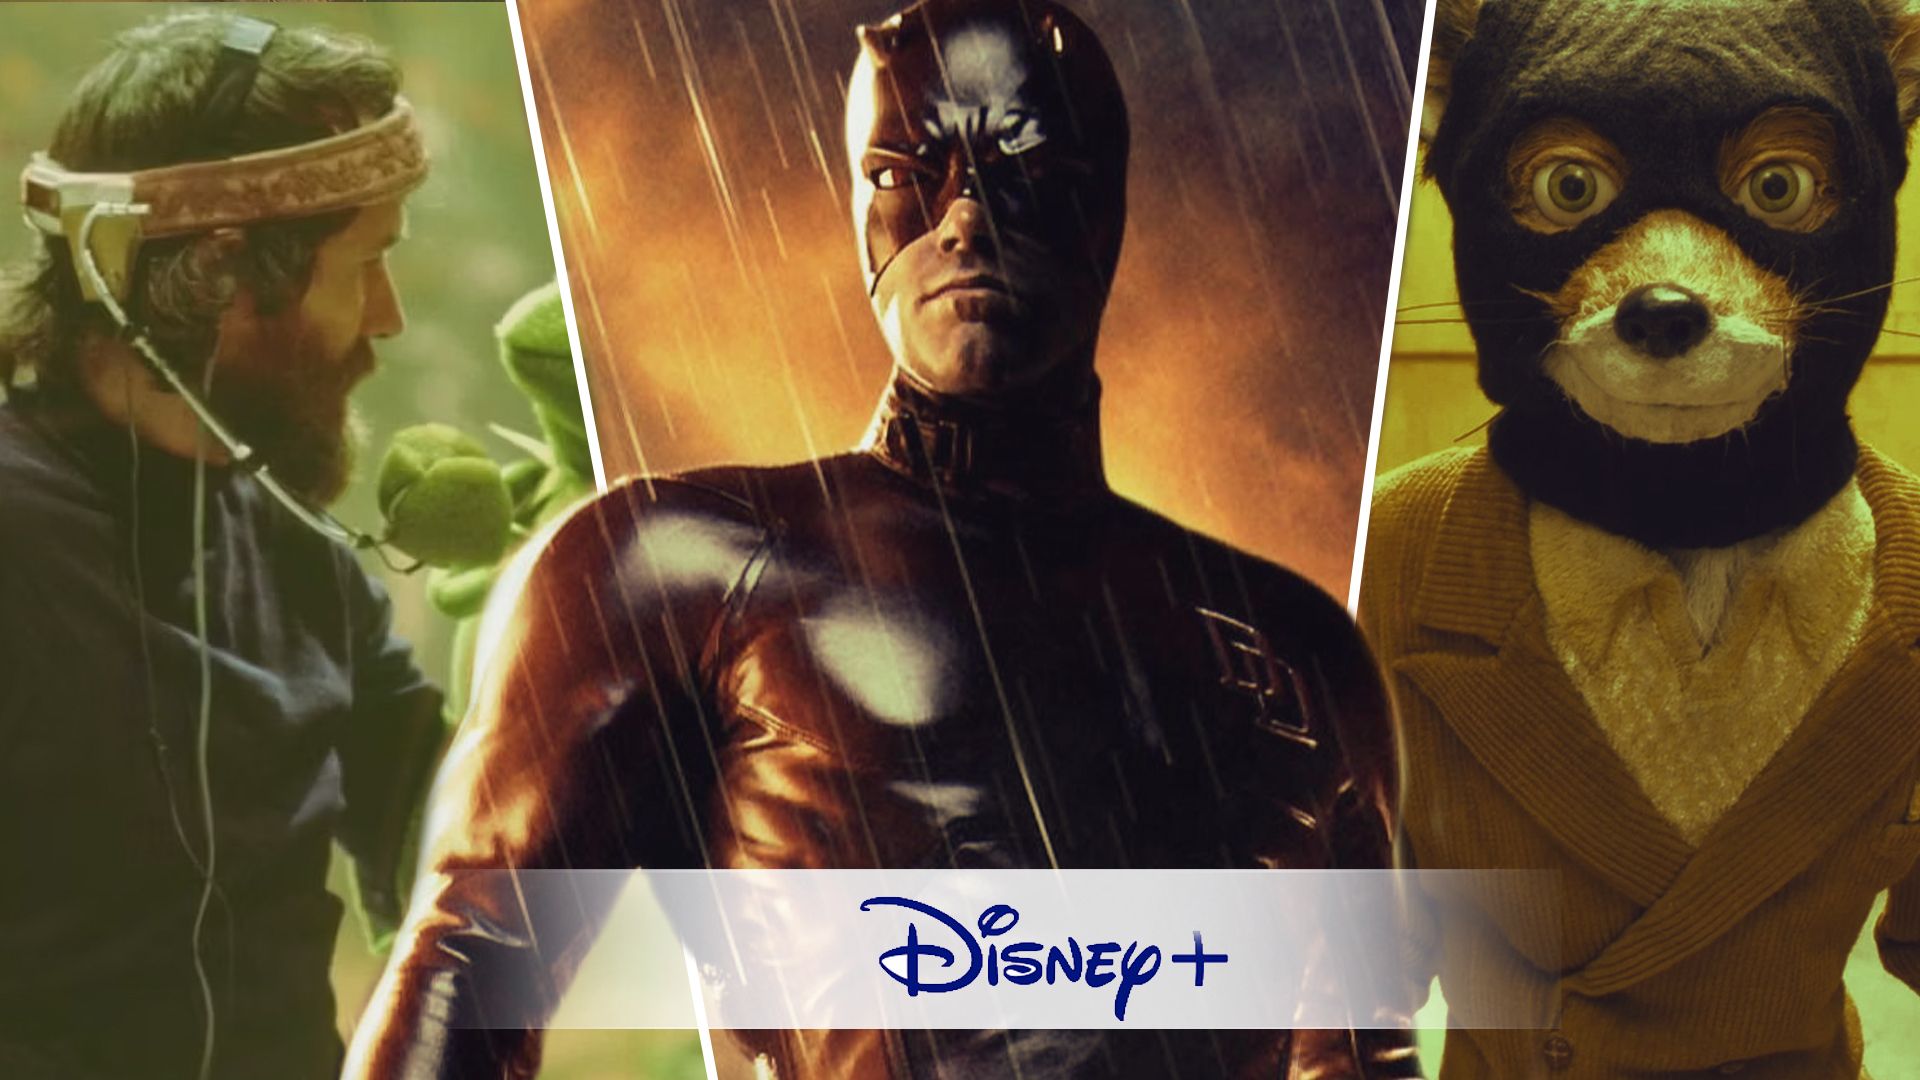 An edited image of three movies including Daredevil, The Fantastic Mr. Fox, and Jim Henson Idea Man